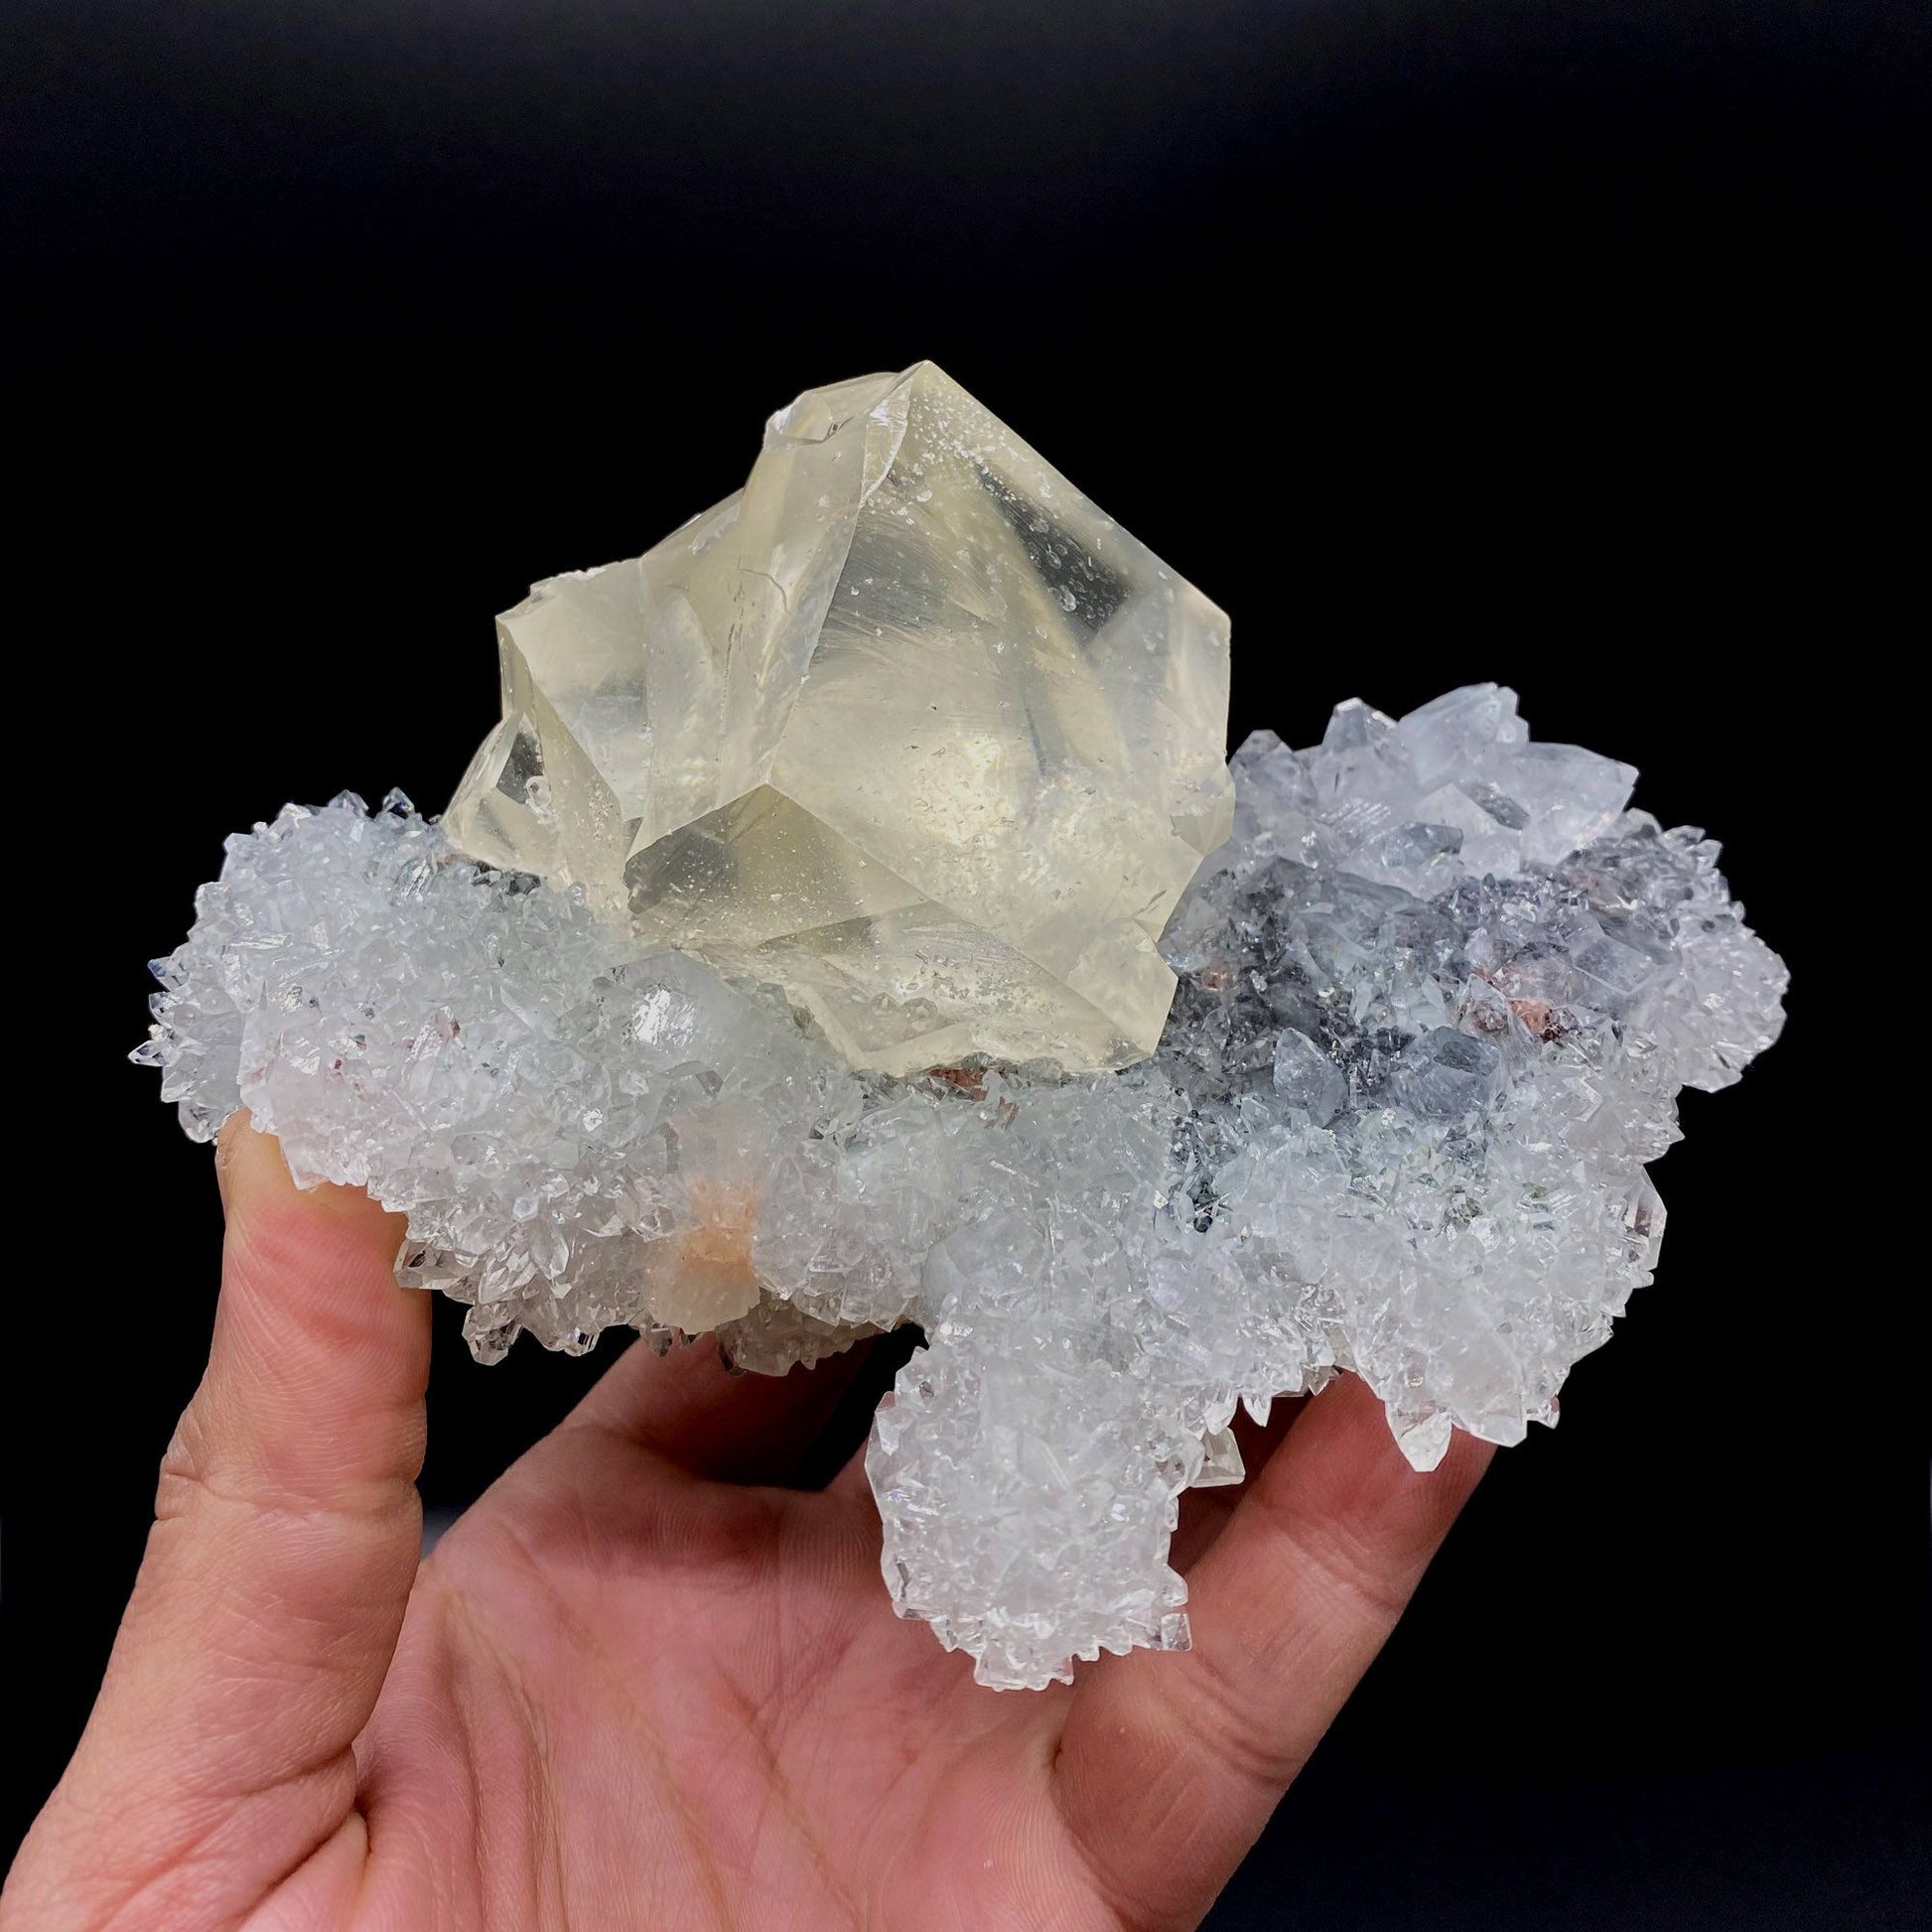 Calcite with Apophyllite on Heuladnite # Q9  https://www.superbminerals.us/products/calcite-with-apophyllite-on-heuladnite-q9  Features:Fascinating specimen of Calcite and impressive mirror lustrous gemmy Apophyllite crystals from superb find in Jalgaon. It displays twin honey colored Calcite Cube, well formed superb flat faces with excellent brilliance and light reflection.&nbsp; Lustrous Calcite crystals grow at the top forming aesthetic